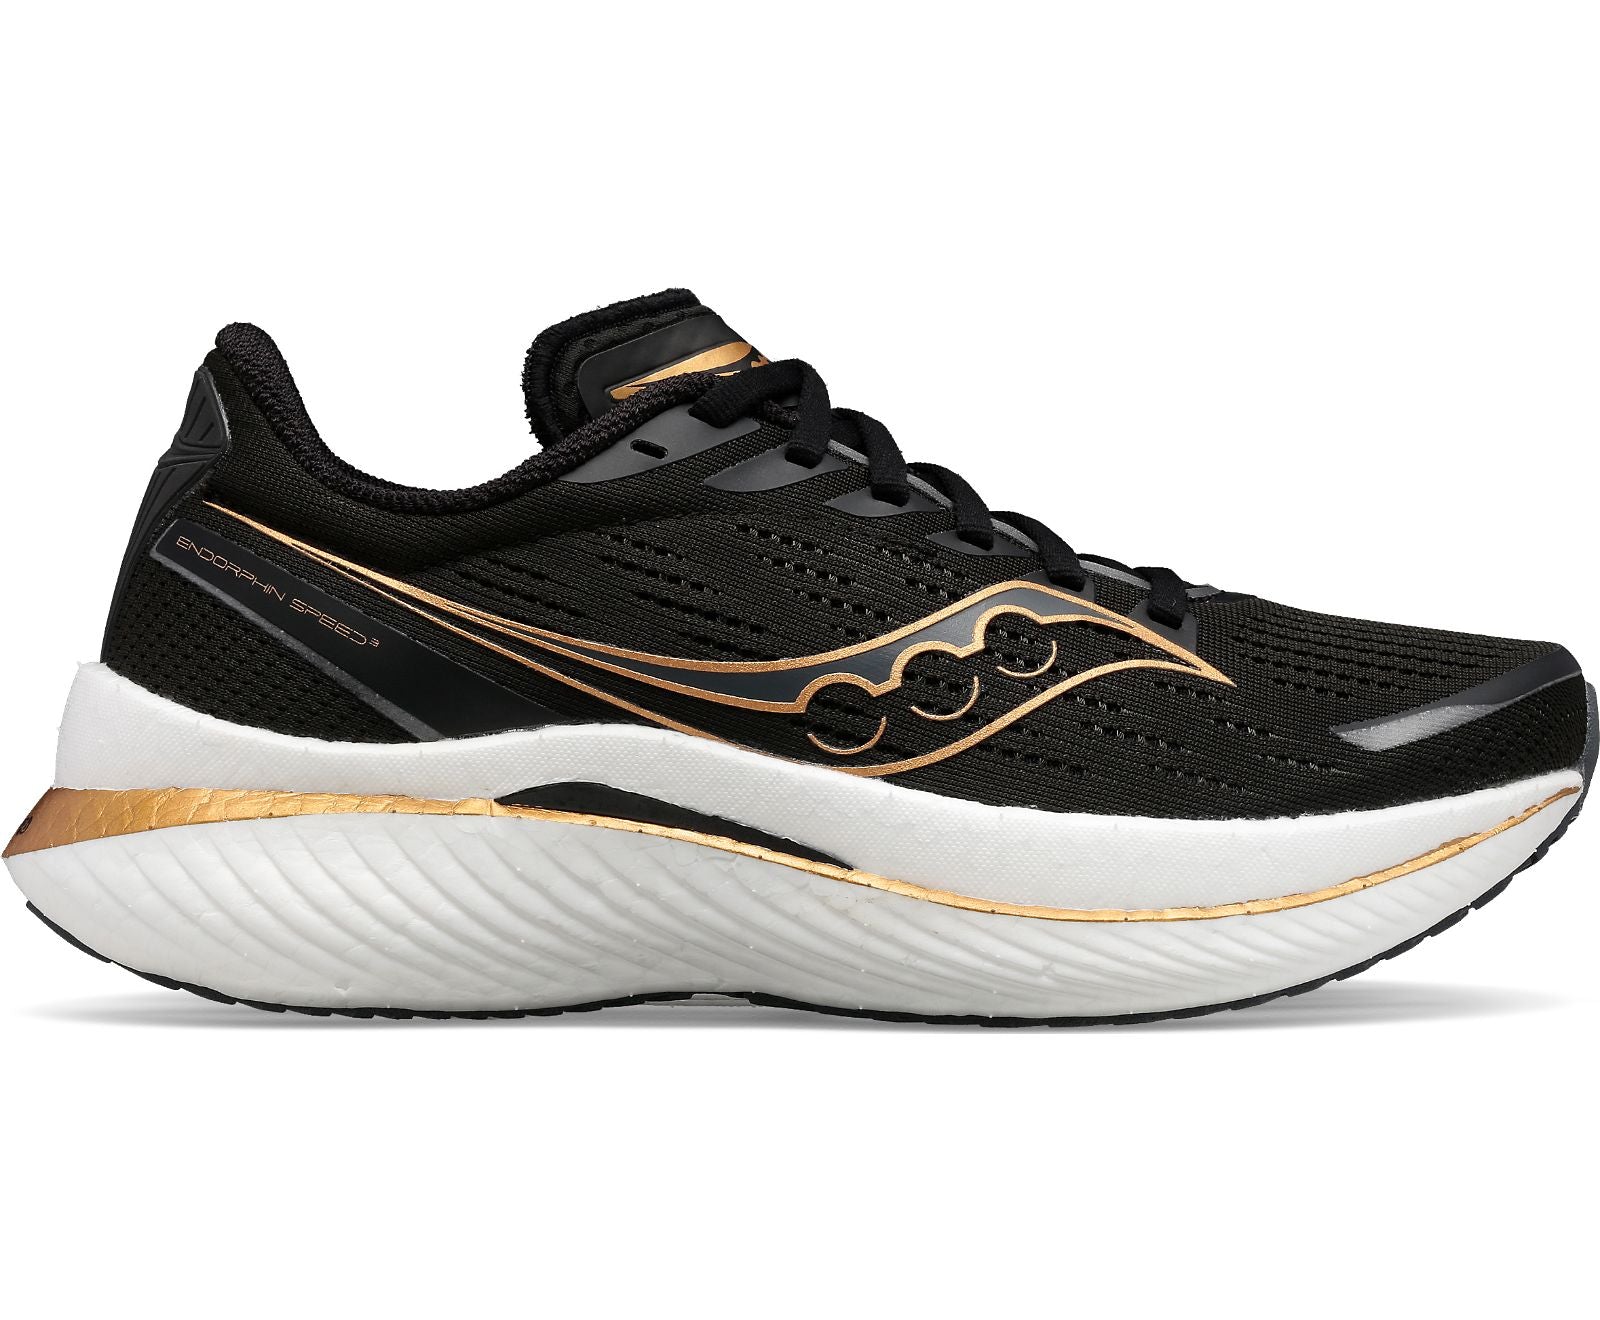 Want to feel faster? Meet the Endorphin Speed 3—a shoe that’s the definition of swift. Designed with a new S-curve winged nylon plate, this third generation speed helps center and support the foot better during the run from toe-off to landing. It’s everything you need in a men's neutral shoe to push your pace with ease.  